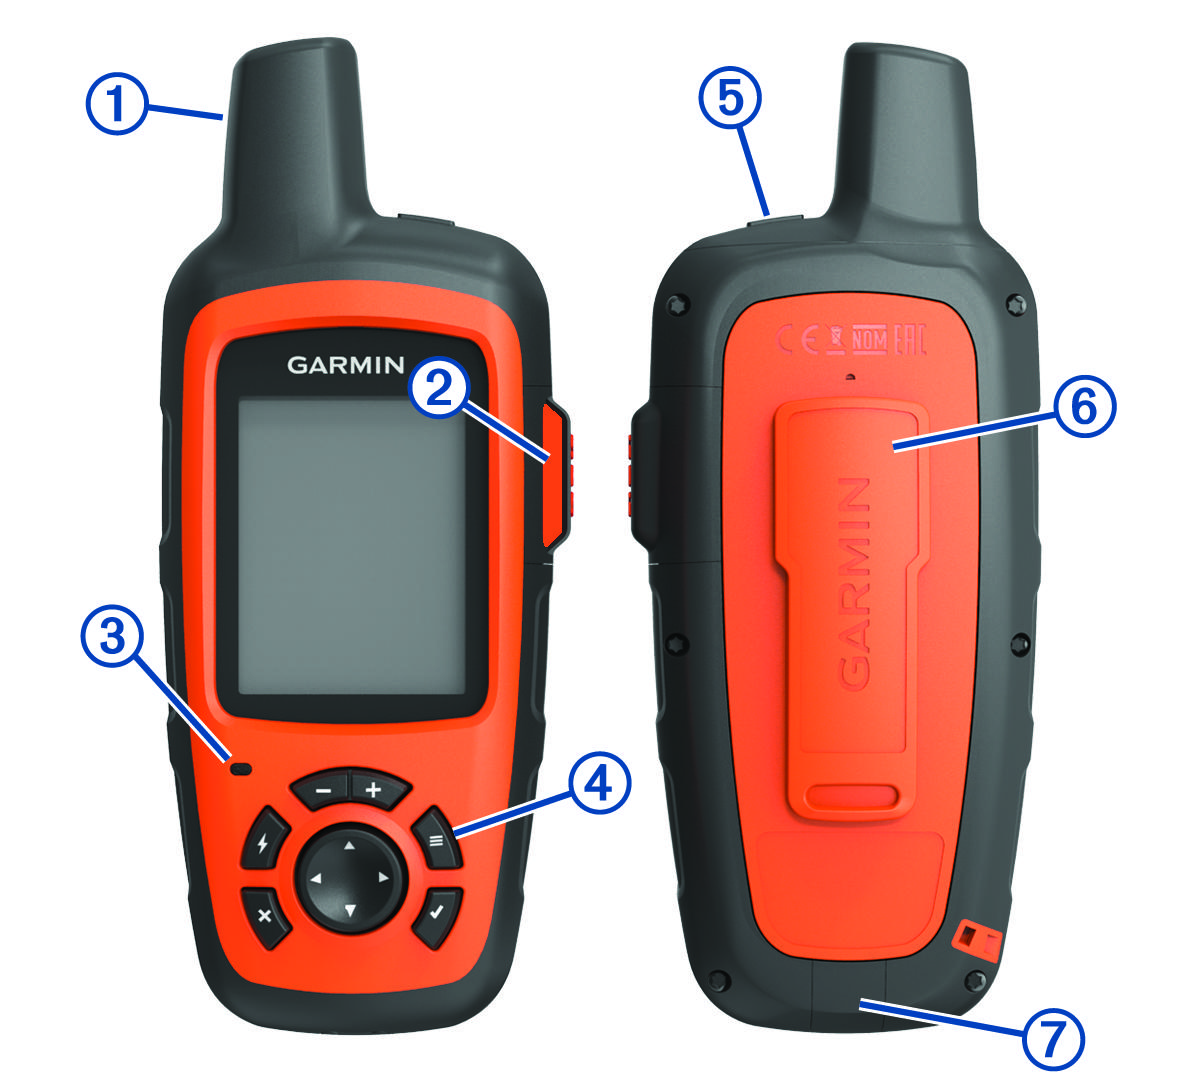 Front and back view of device with callouts